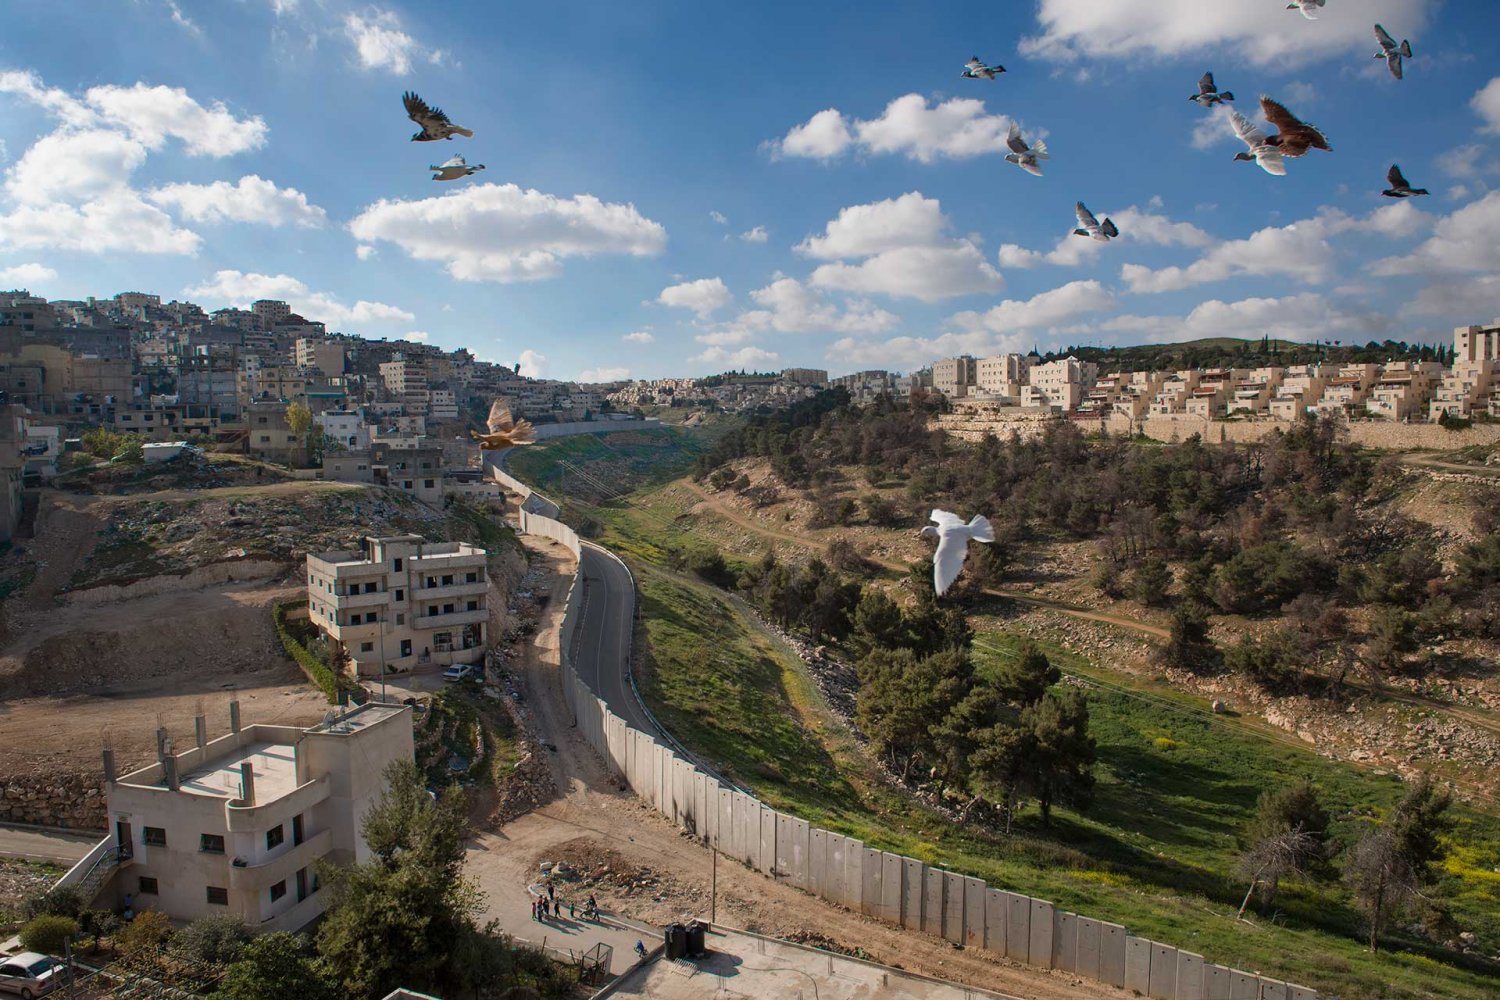 Comparison view of the Palestinian neighborhoods of Shu'fat / Shu‘fat refugee camp (left) and the Israeli Jewish settlement of Pisgat Ze’ev (right), which lies on the “Jerusalem” side of the Separation Wall. April 3, 2017. 